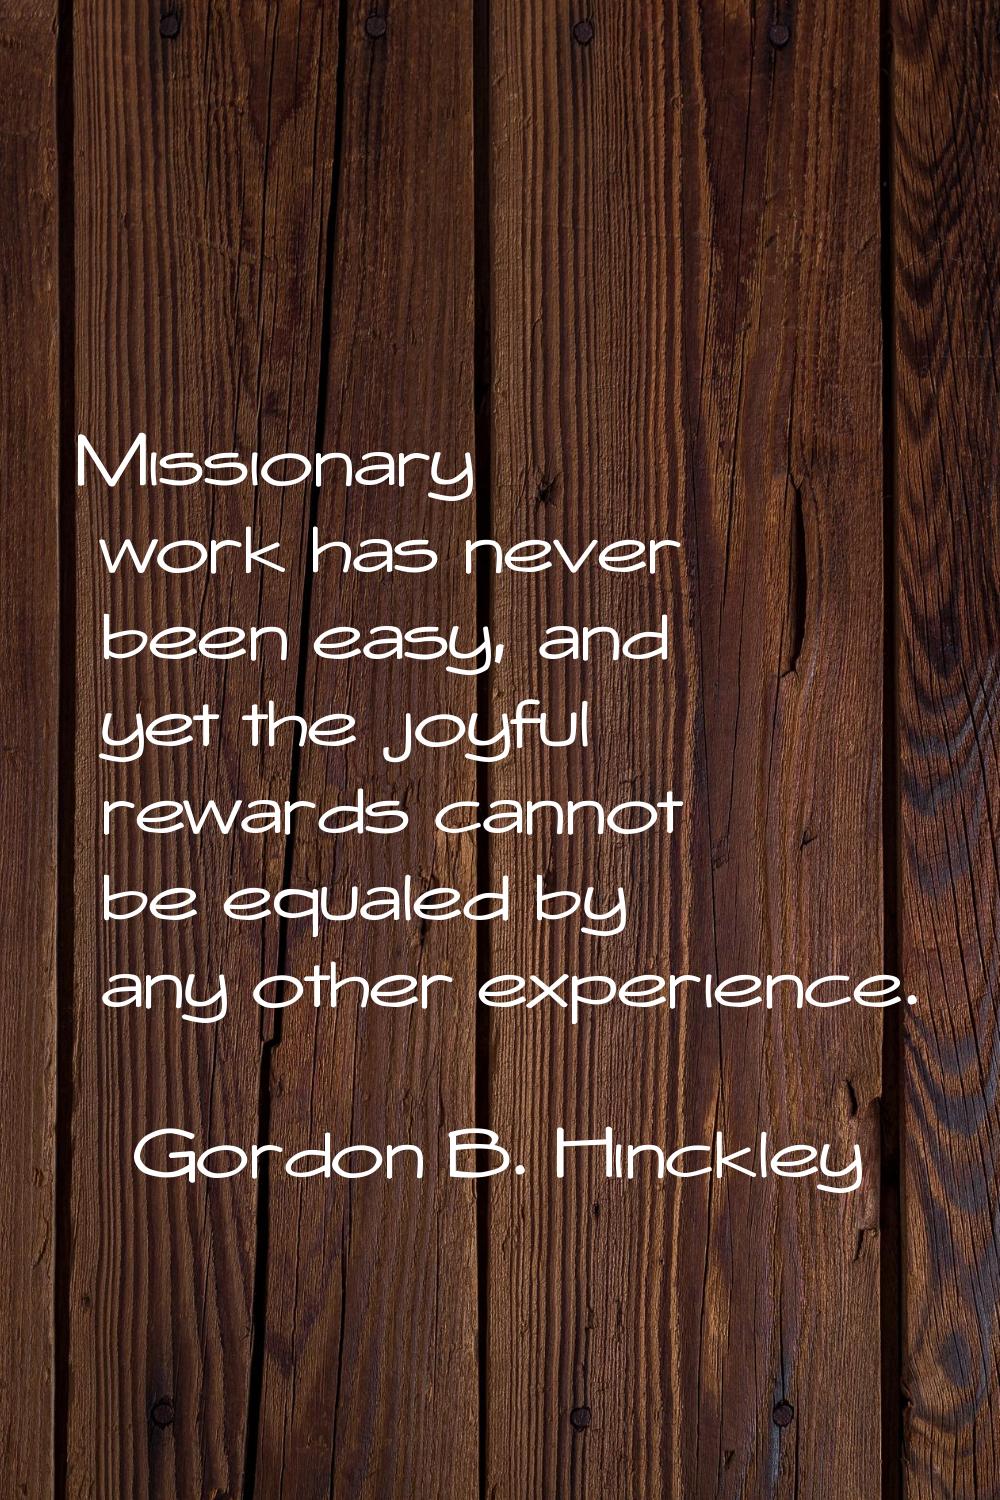 Missionary work has never been easy, and yet the joyful rewards cannot be equaled by any other expe